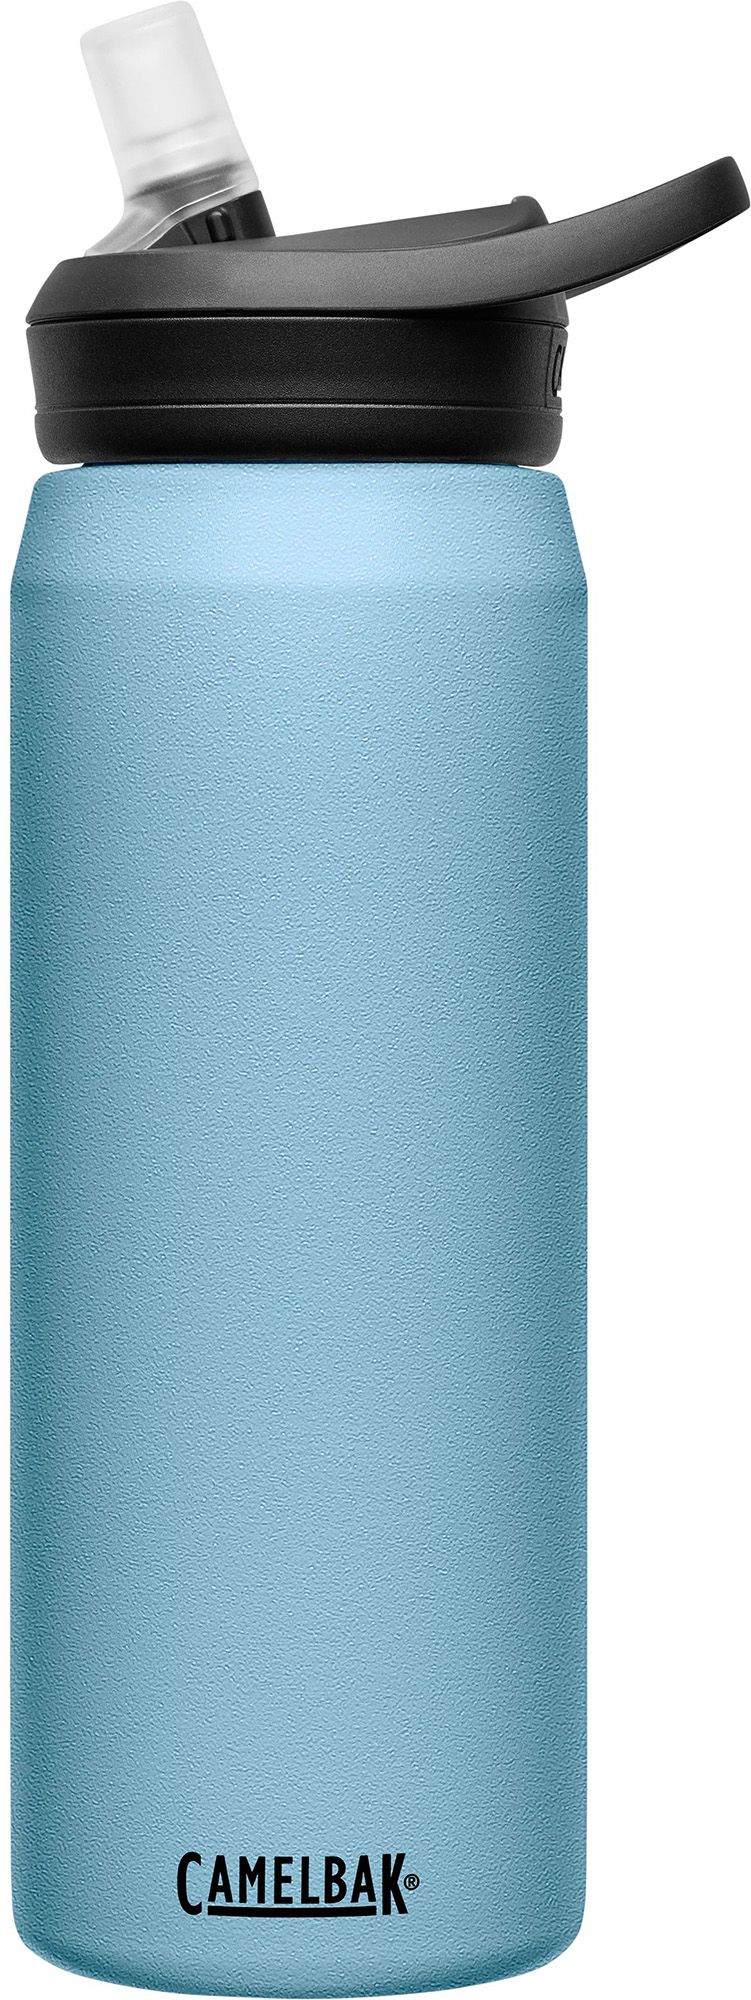 Owala 32 oz. FreeSip water bottle, Gallery posted by Alanapasseri